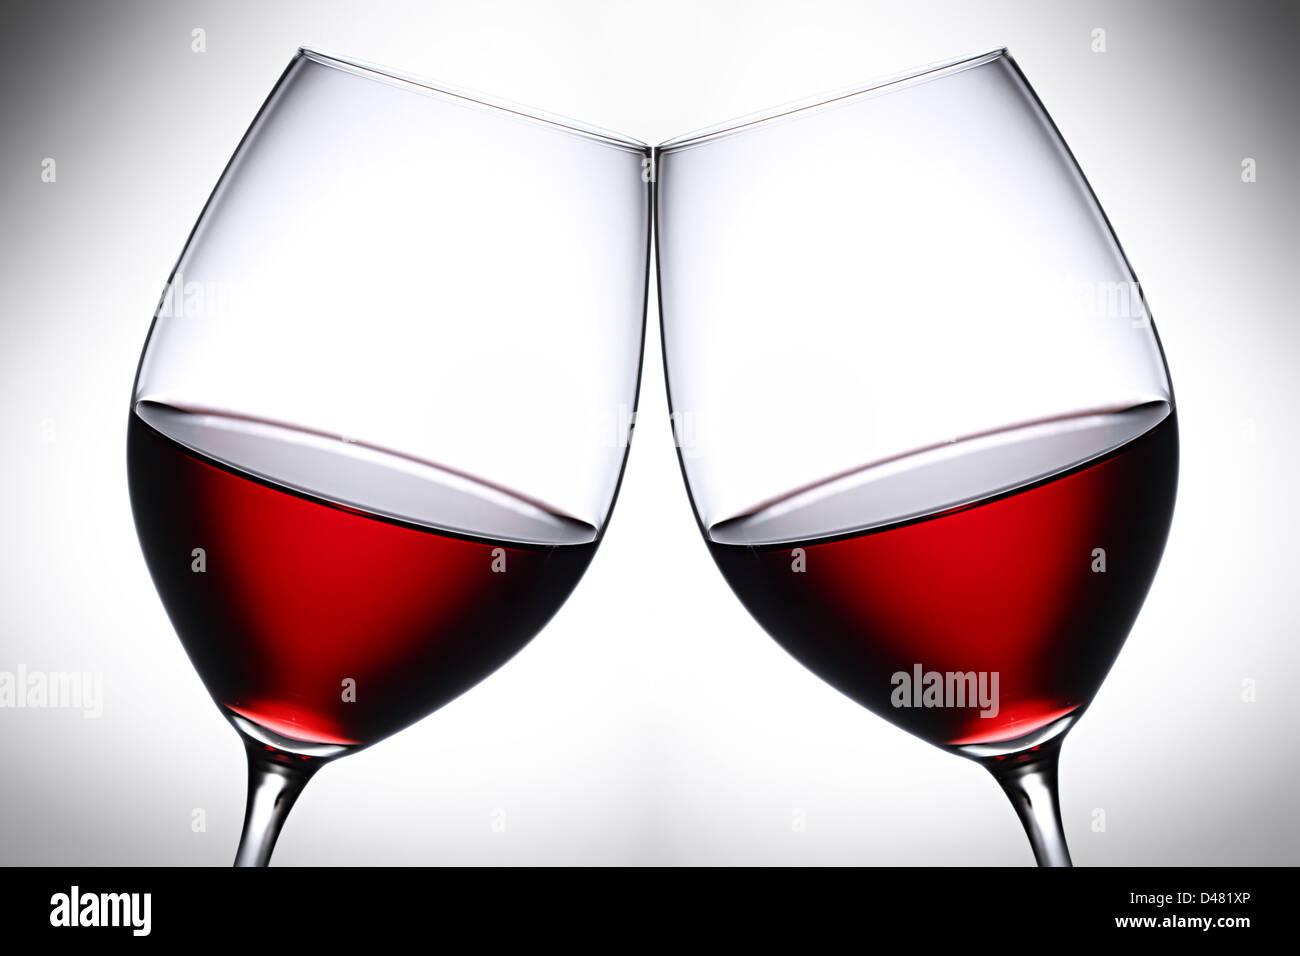 a pair of red wine glasses Stock Photo